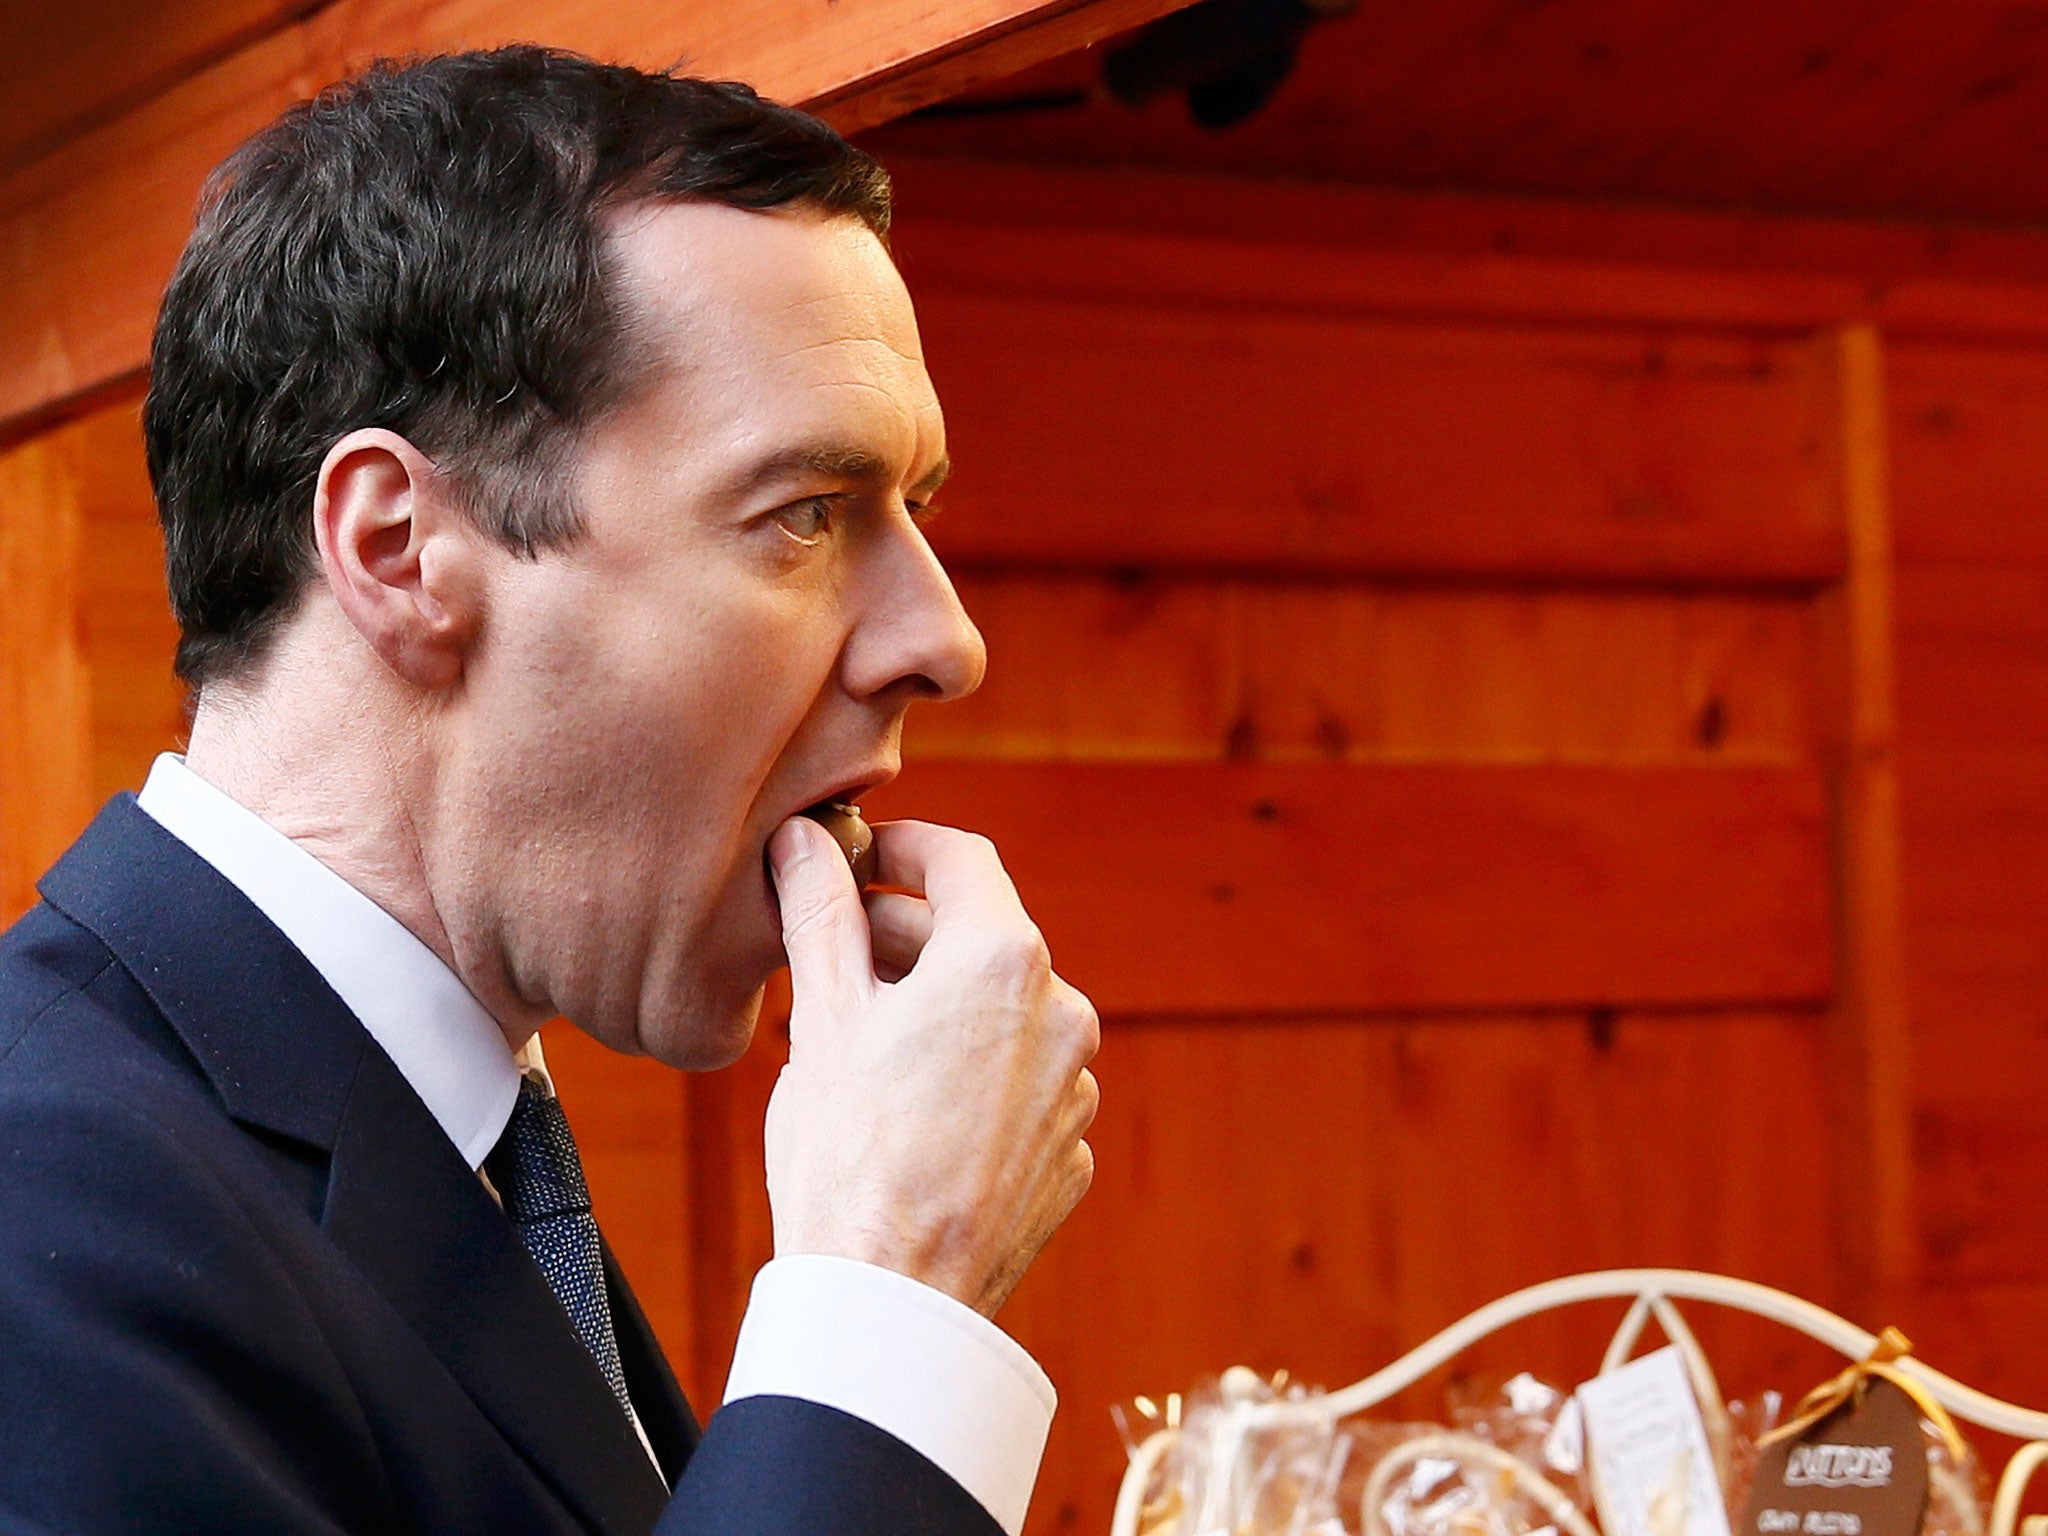 Osborne has implemented the sugary drinks tax to try and combat childhood obesity